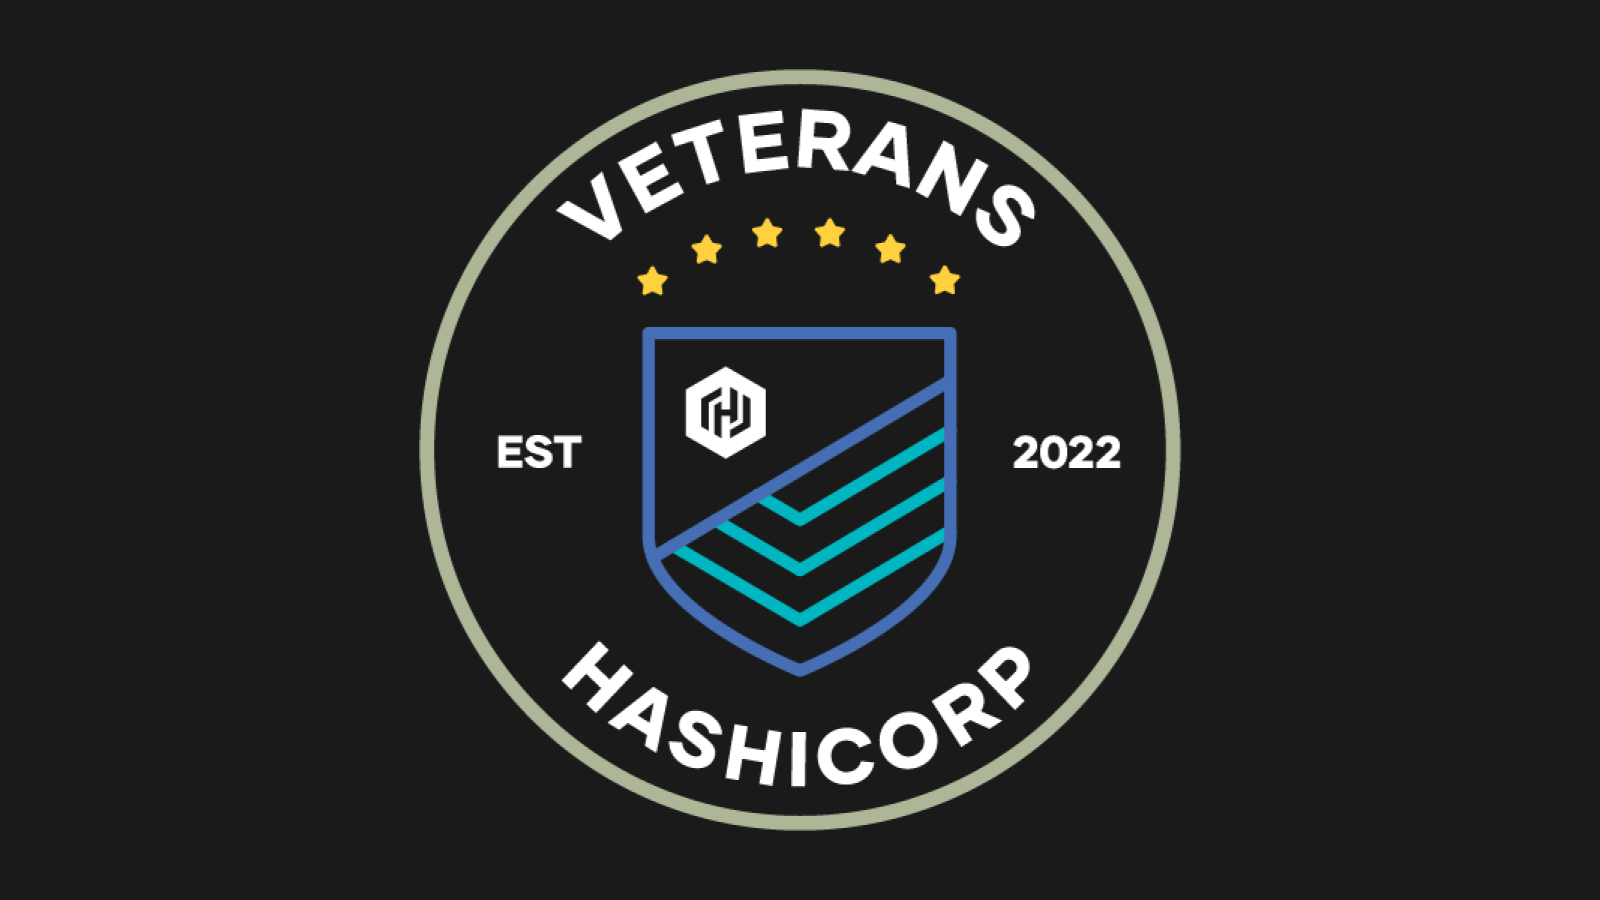 How Military Service Impacted Two HashiCorp Veterans